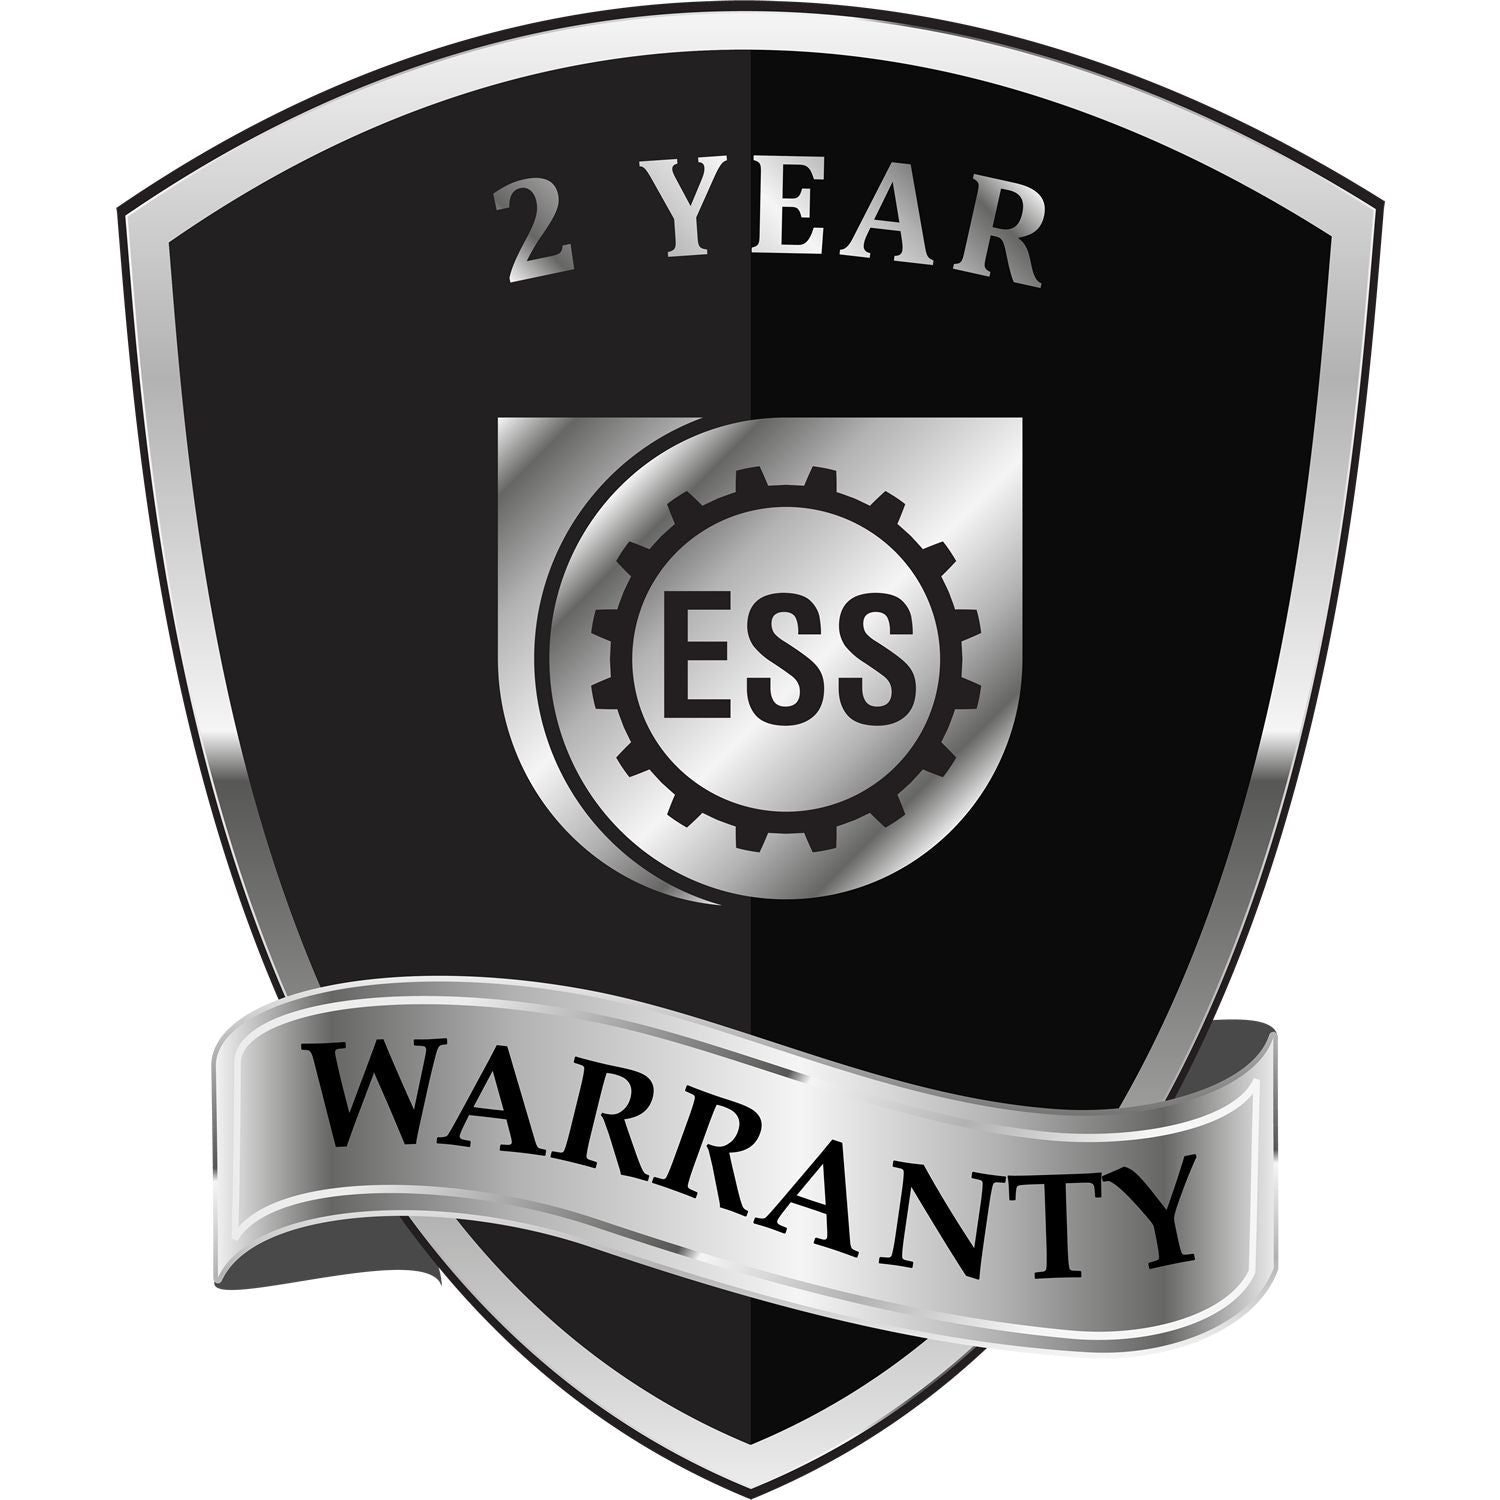 A badge or emblem showing a warranty icon for the Handheld Tennessee Land Surveyor Seal